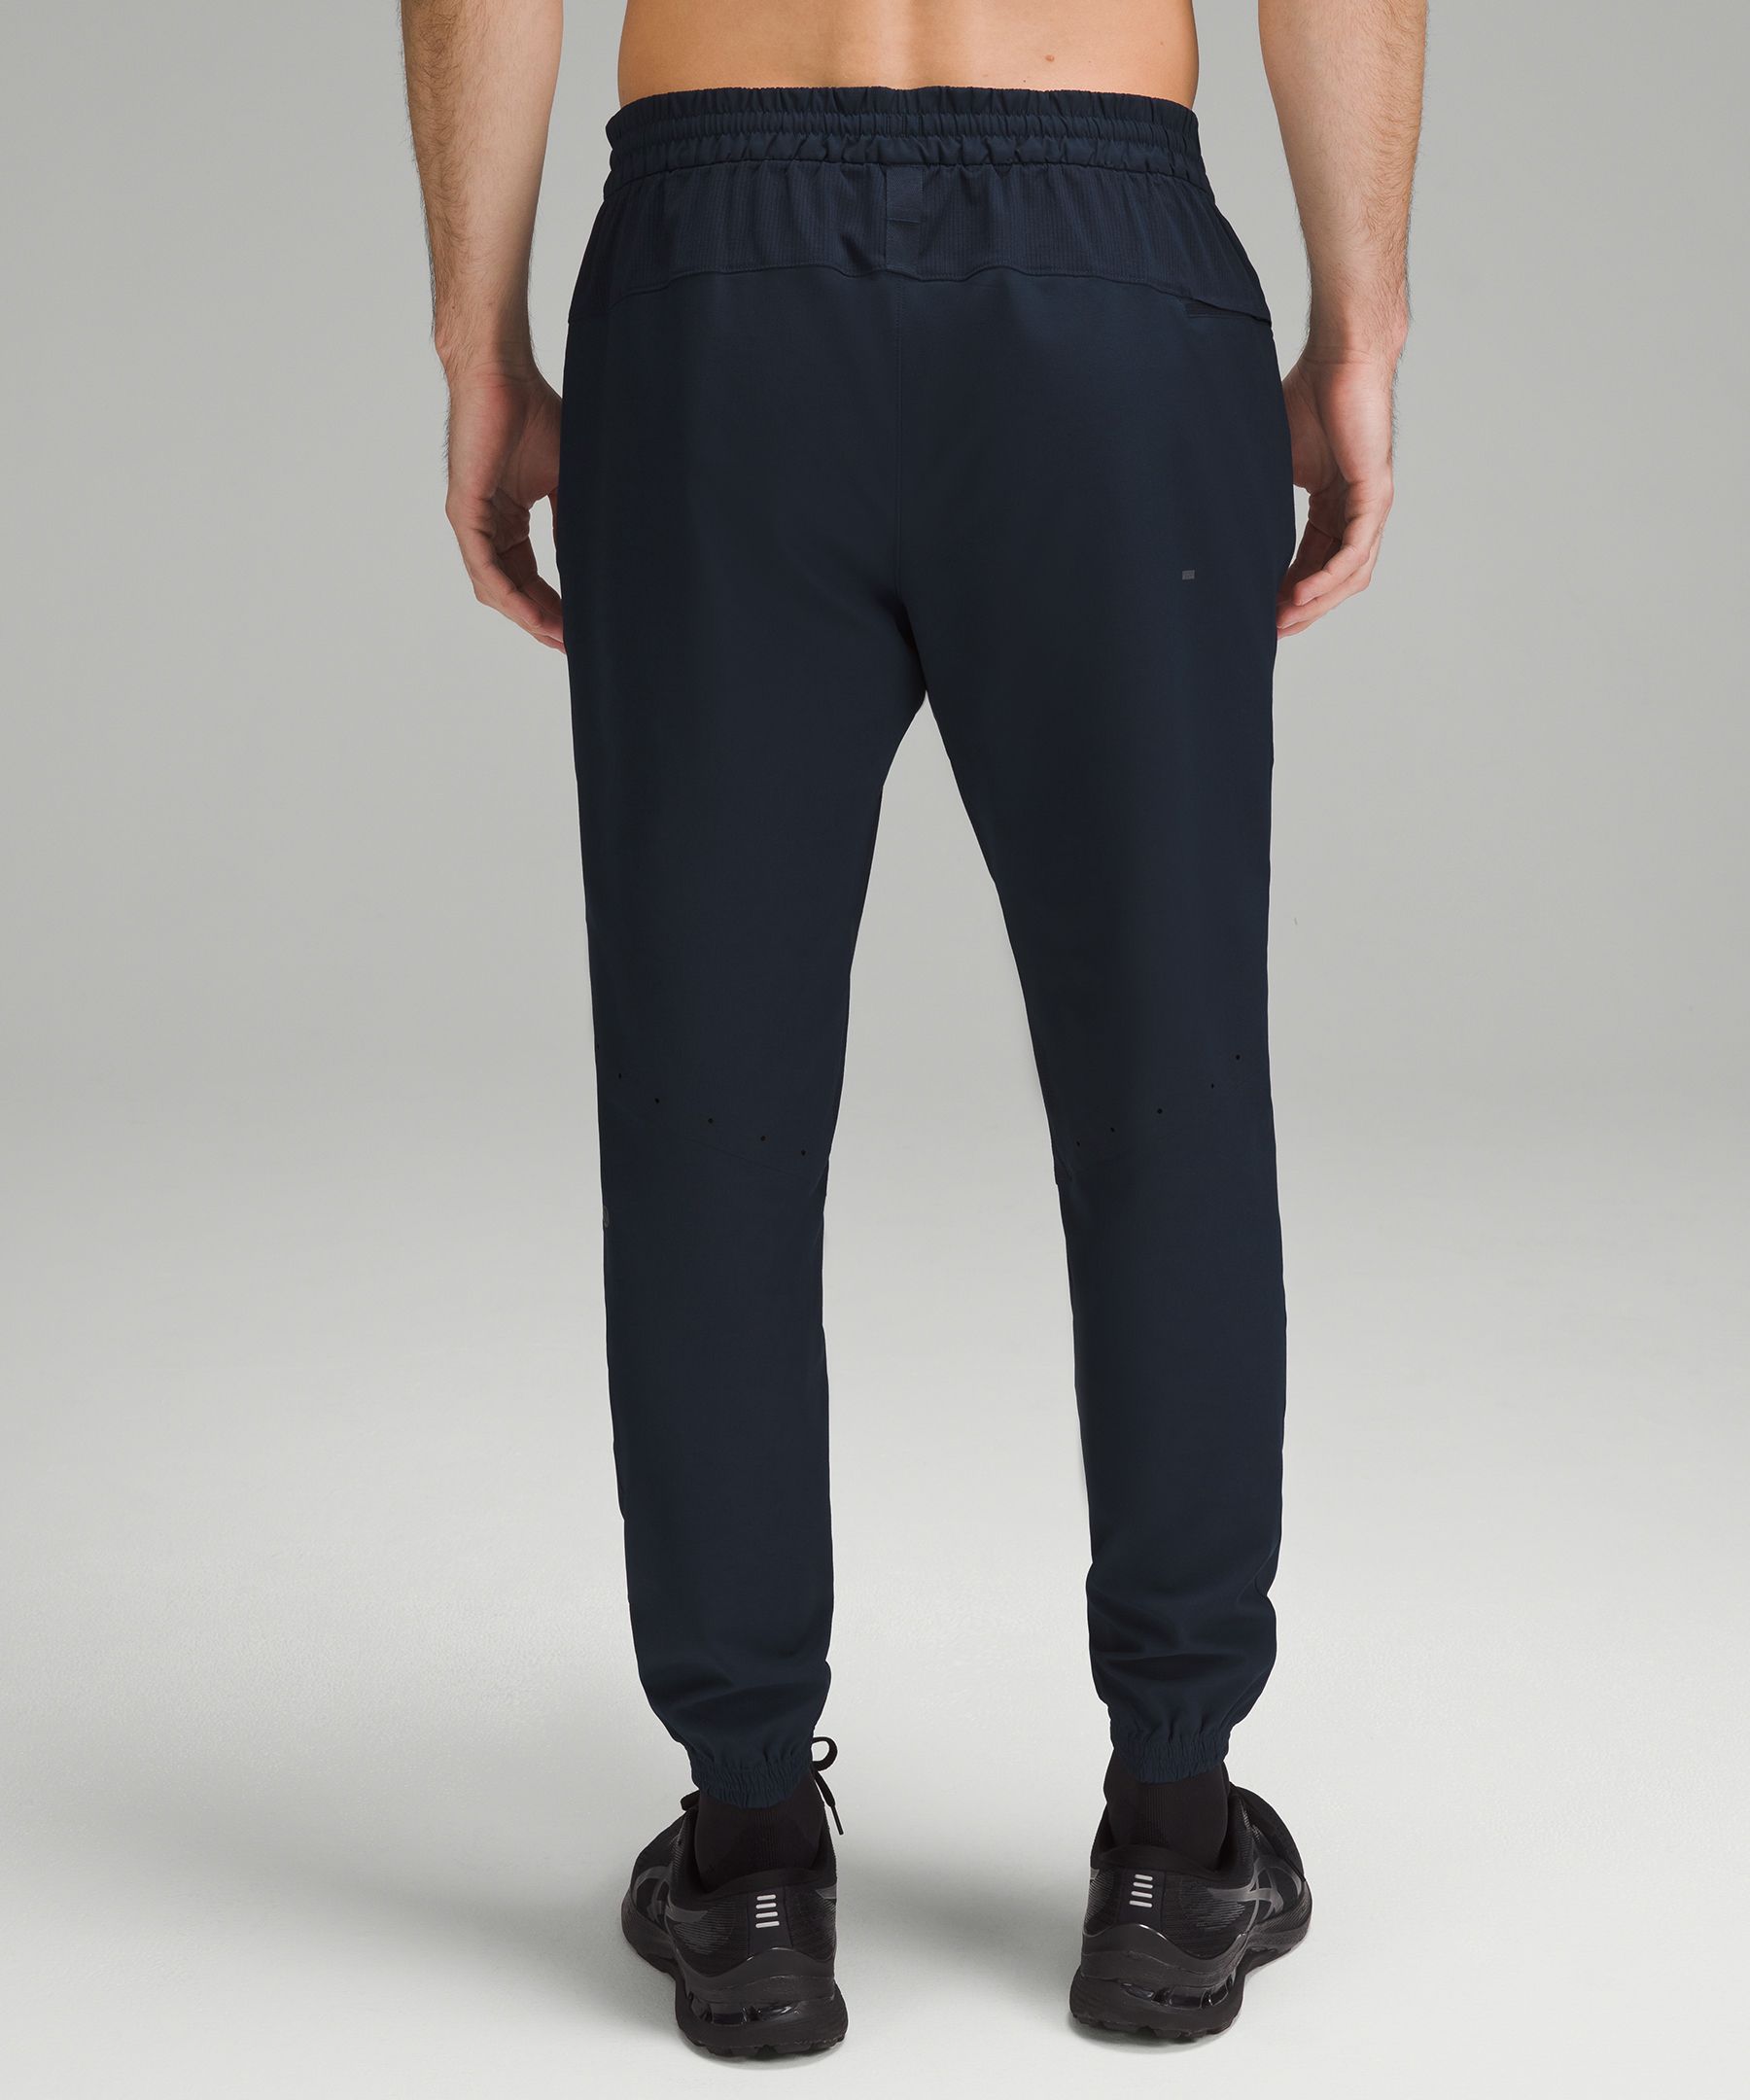 LU Quick Dry Drawstring All In Motion Joggers For Women And Men